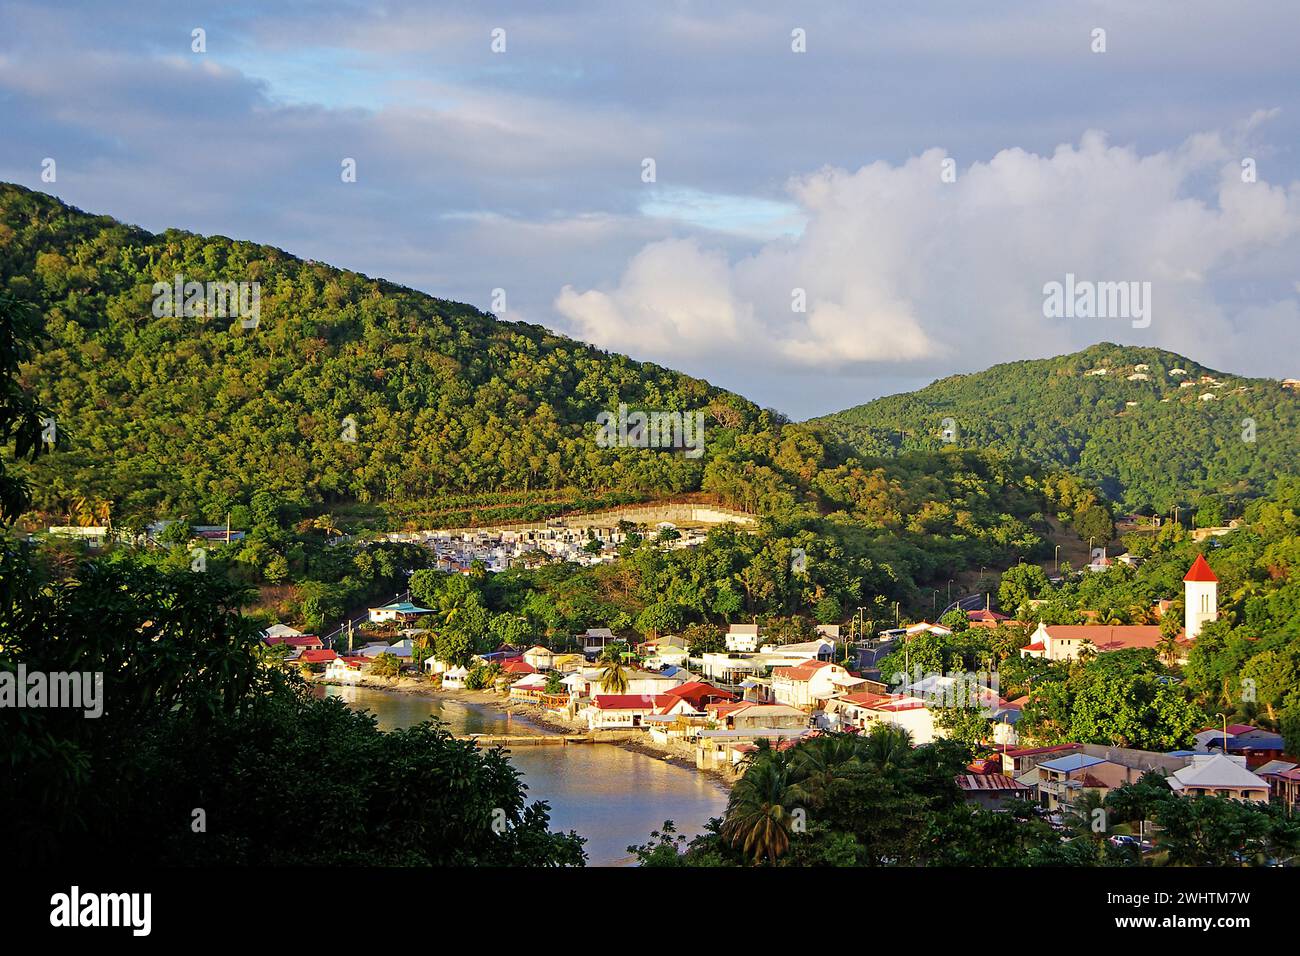 Caribbean, French Antilles, Guadeloupe, Basse-Terre, View of the village Deshaies with harbour Stock Photo